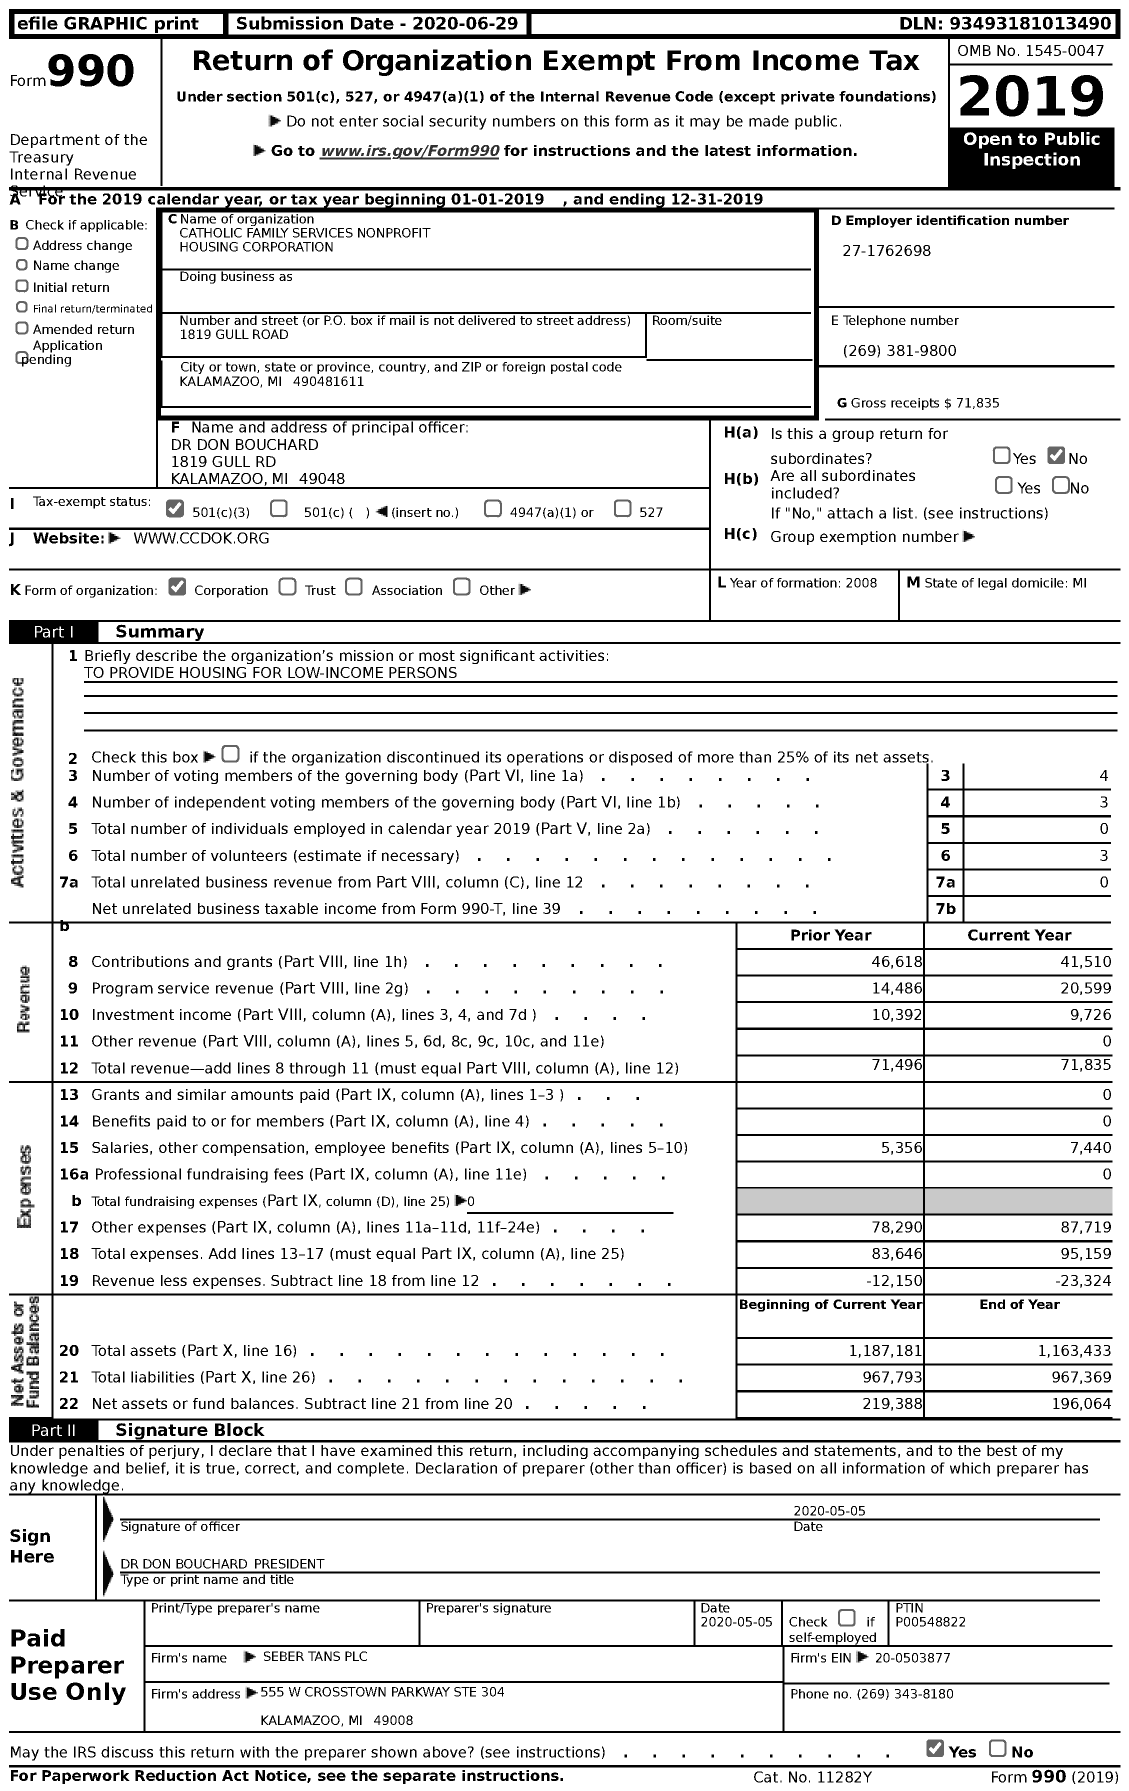 Image of first page of 2019 Form 990 for Catholic Family Services Nonprofit Housing Corporation